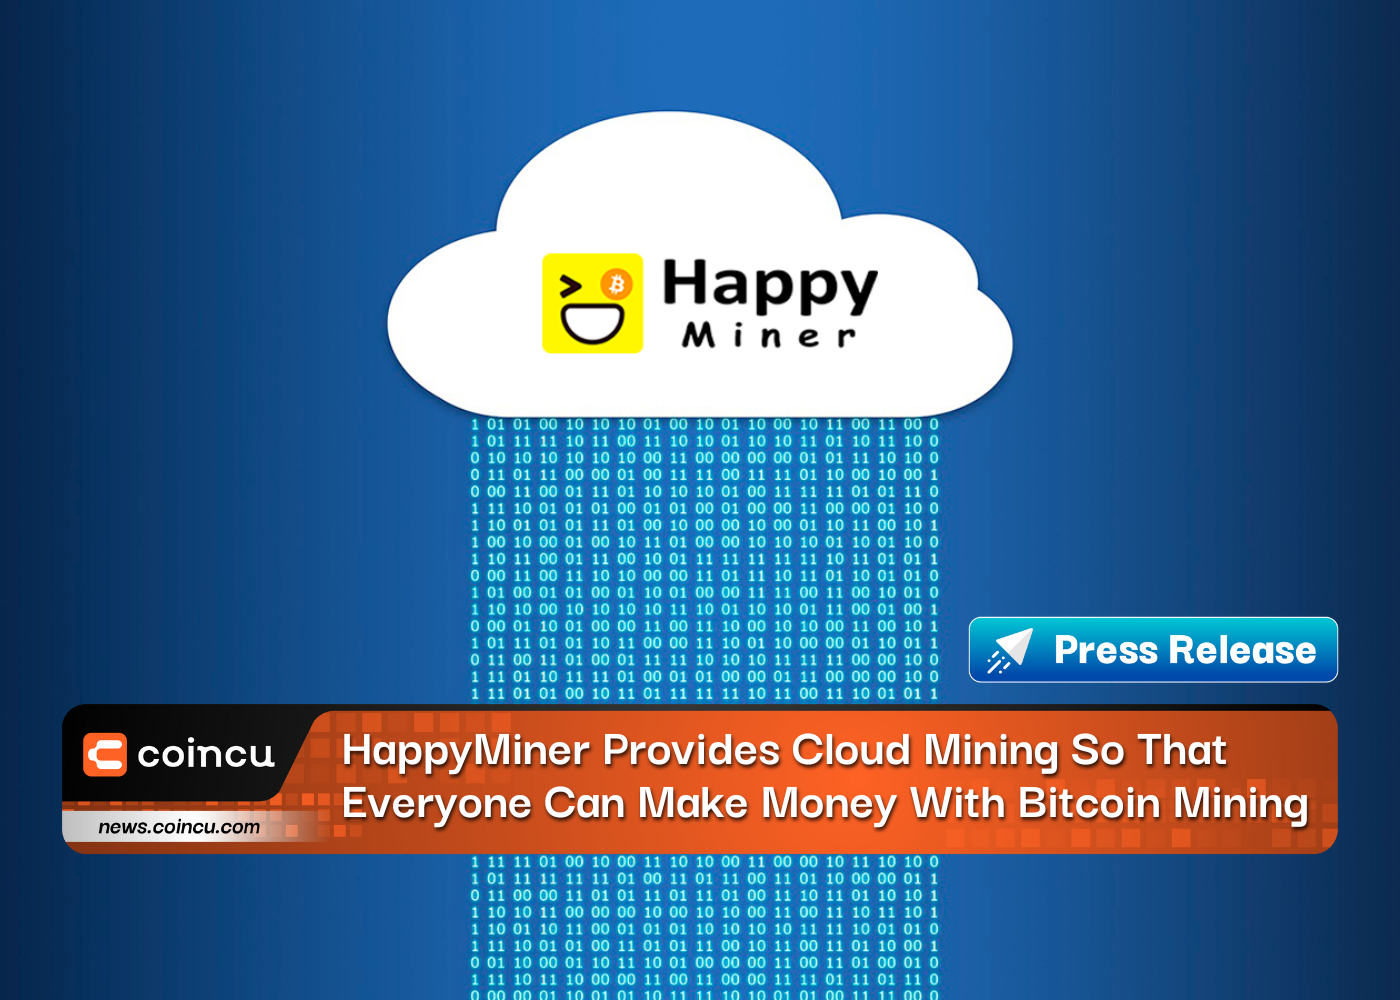 HappyMiner Provides Cloud Mining So That Everyone Can Make Money With Bitcoin Mining